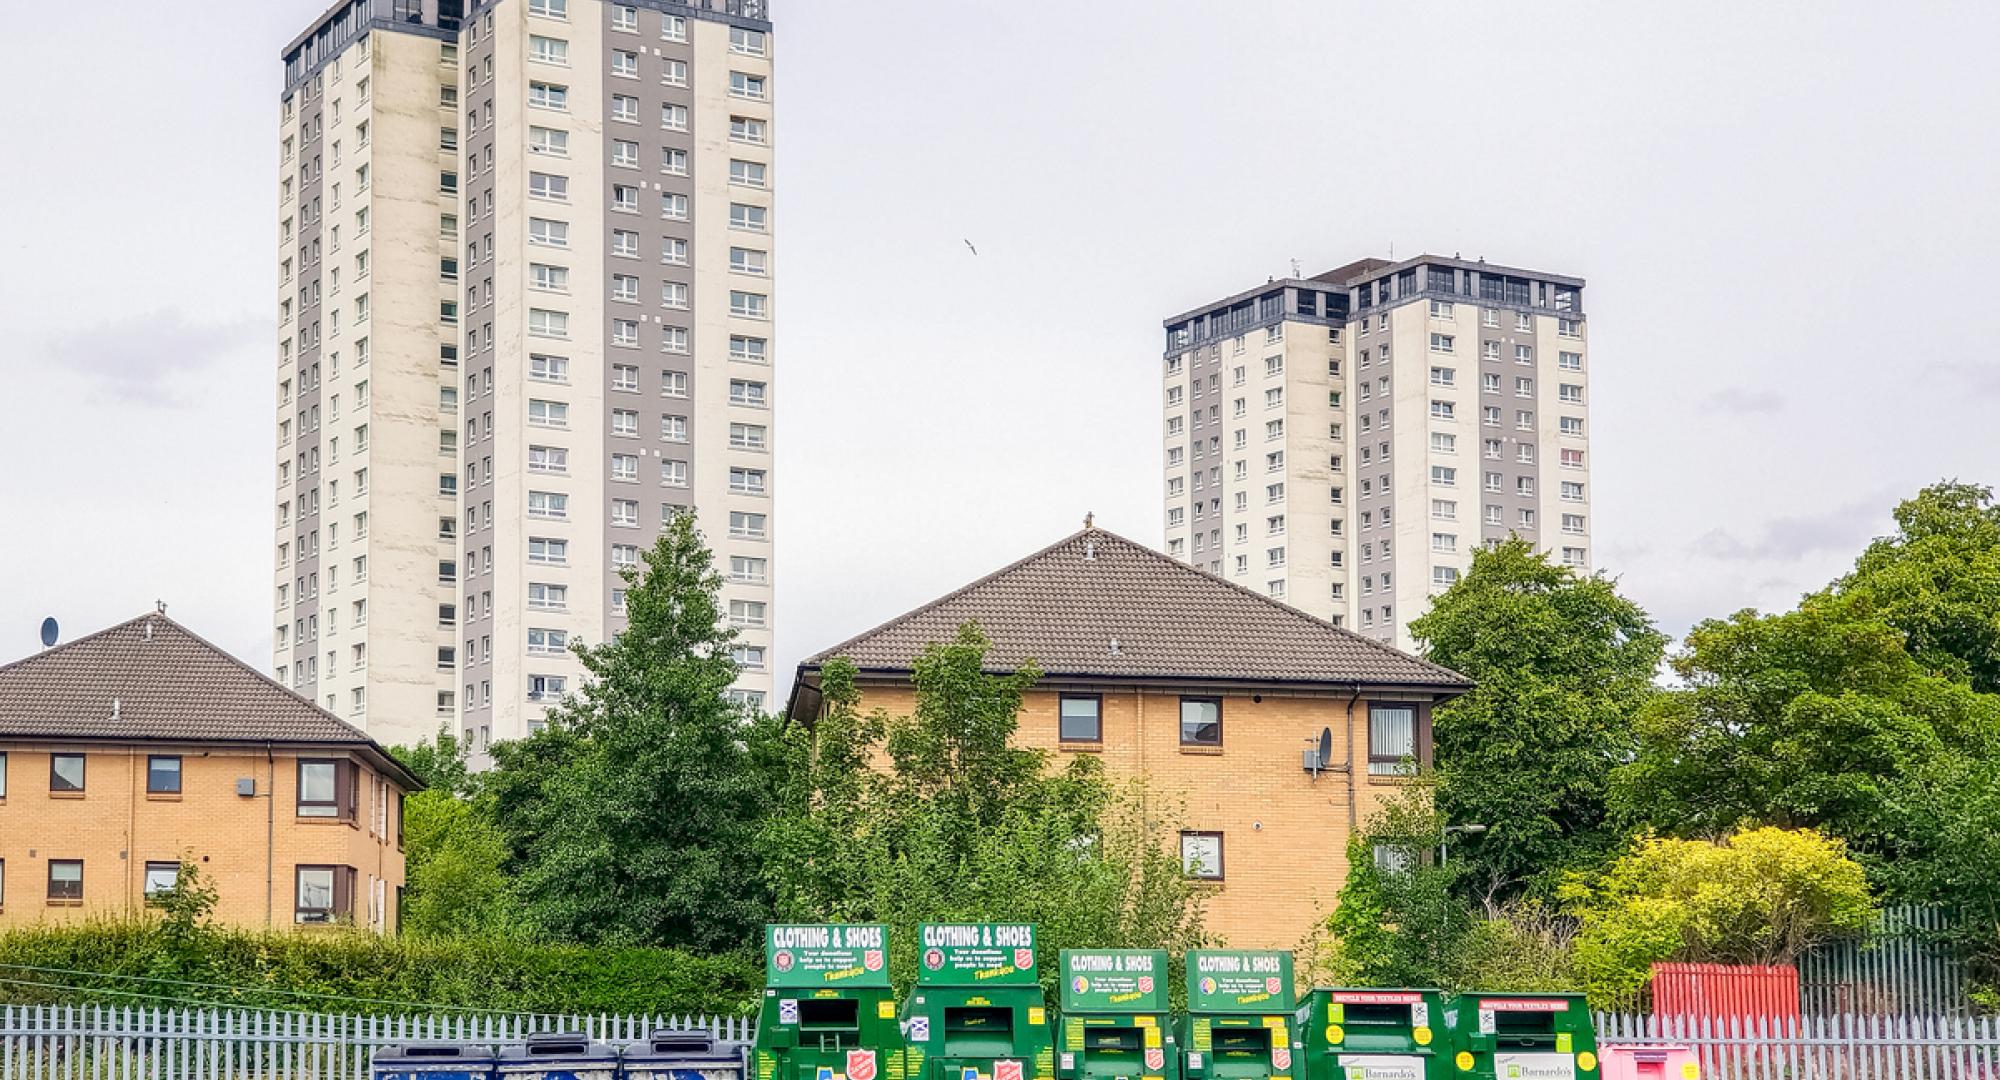 A series of recycling and charity donation containers in the Knightswood area of Glasgow.